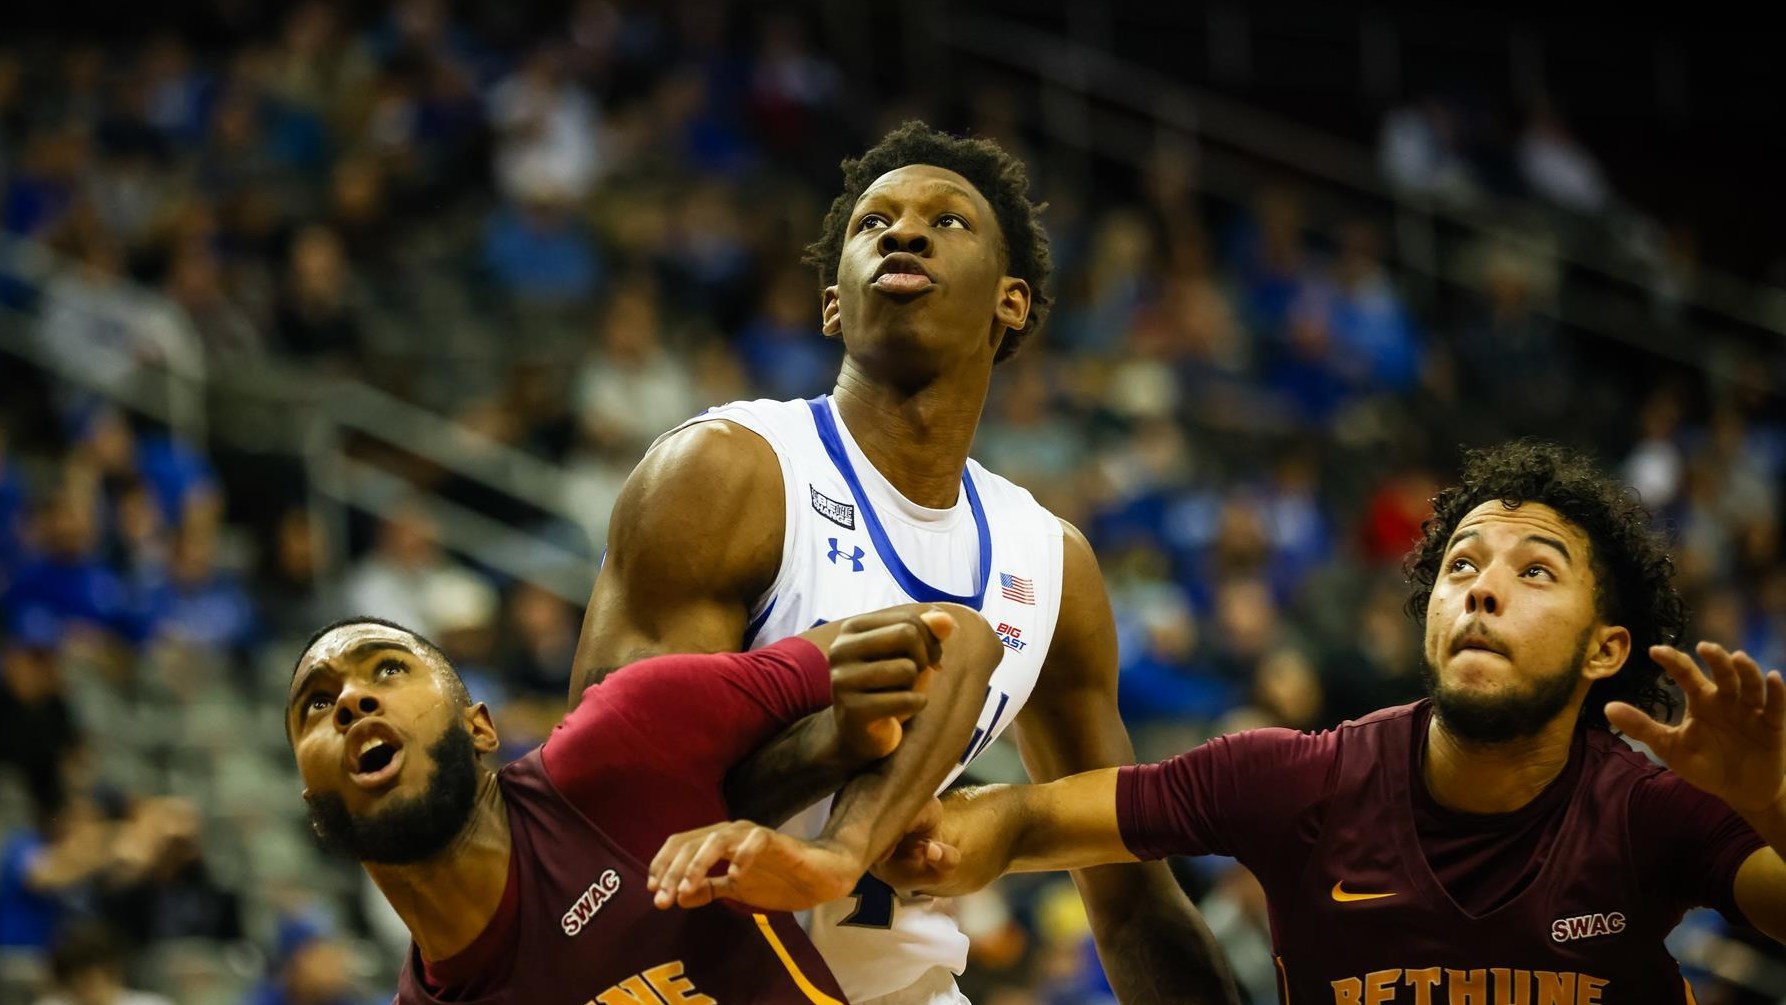 Seton Hall's Tyrese Samuel looks to grab a rebound over Bethune-Cookman players in a game at home.